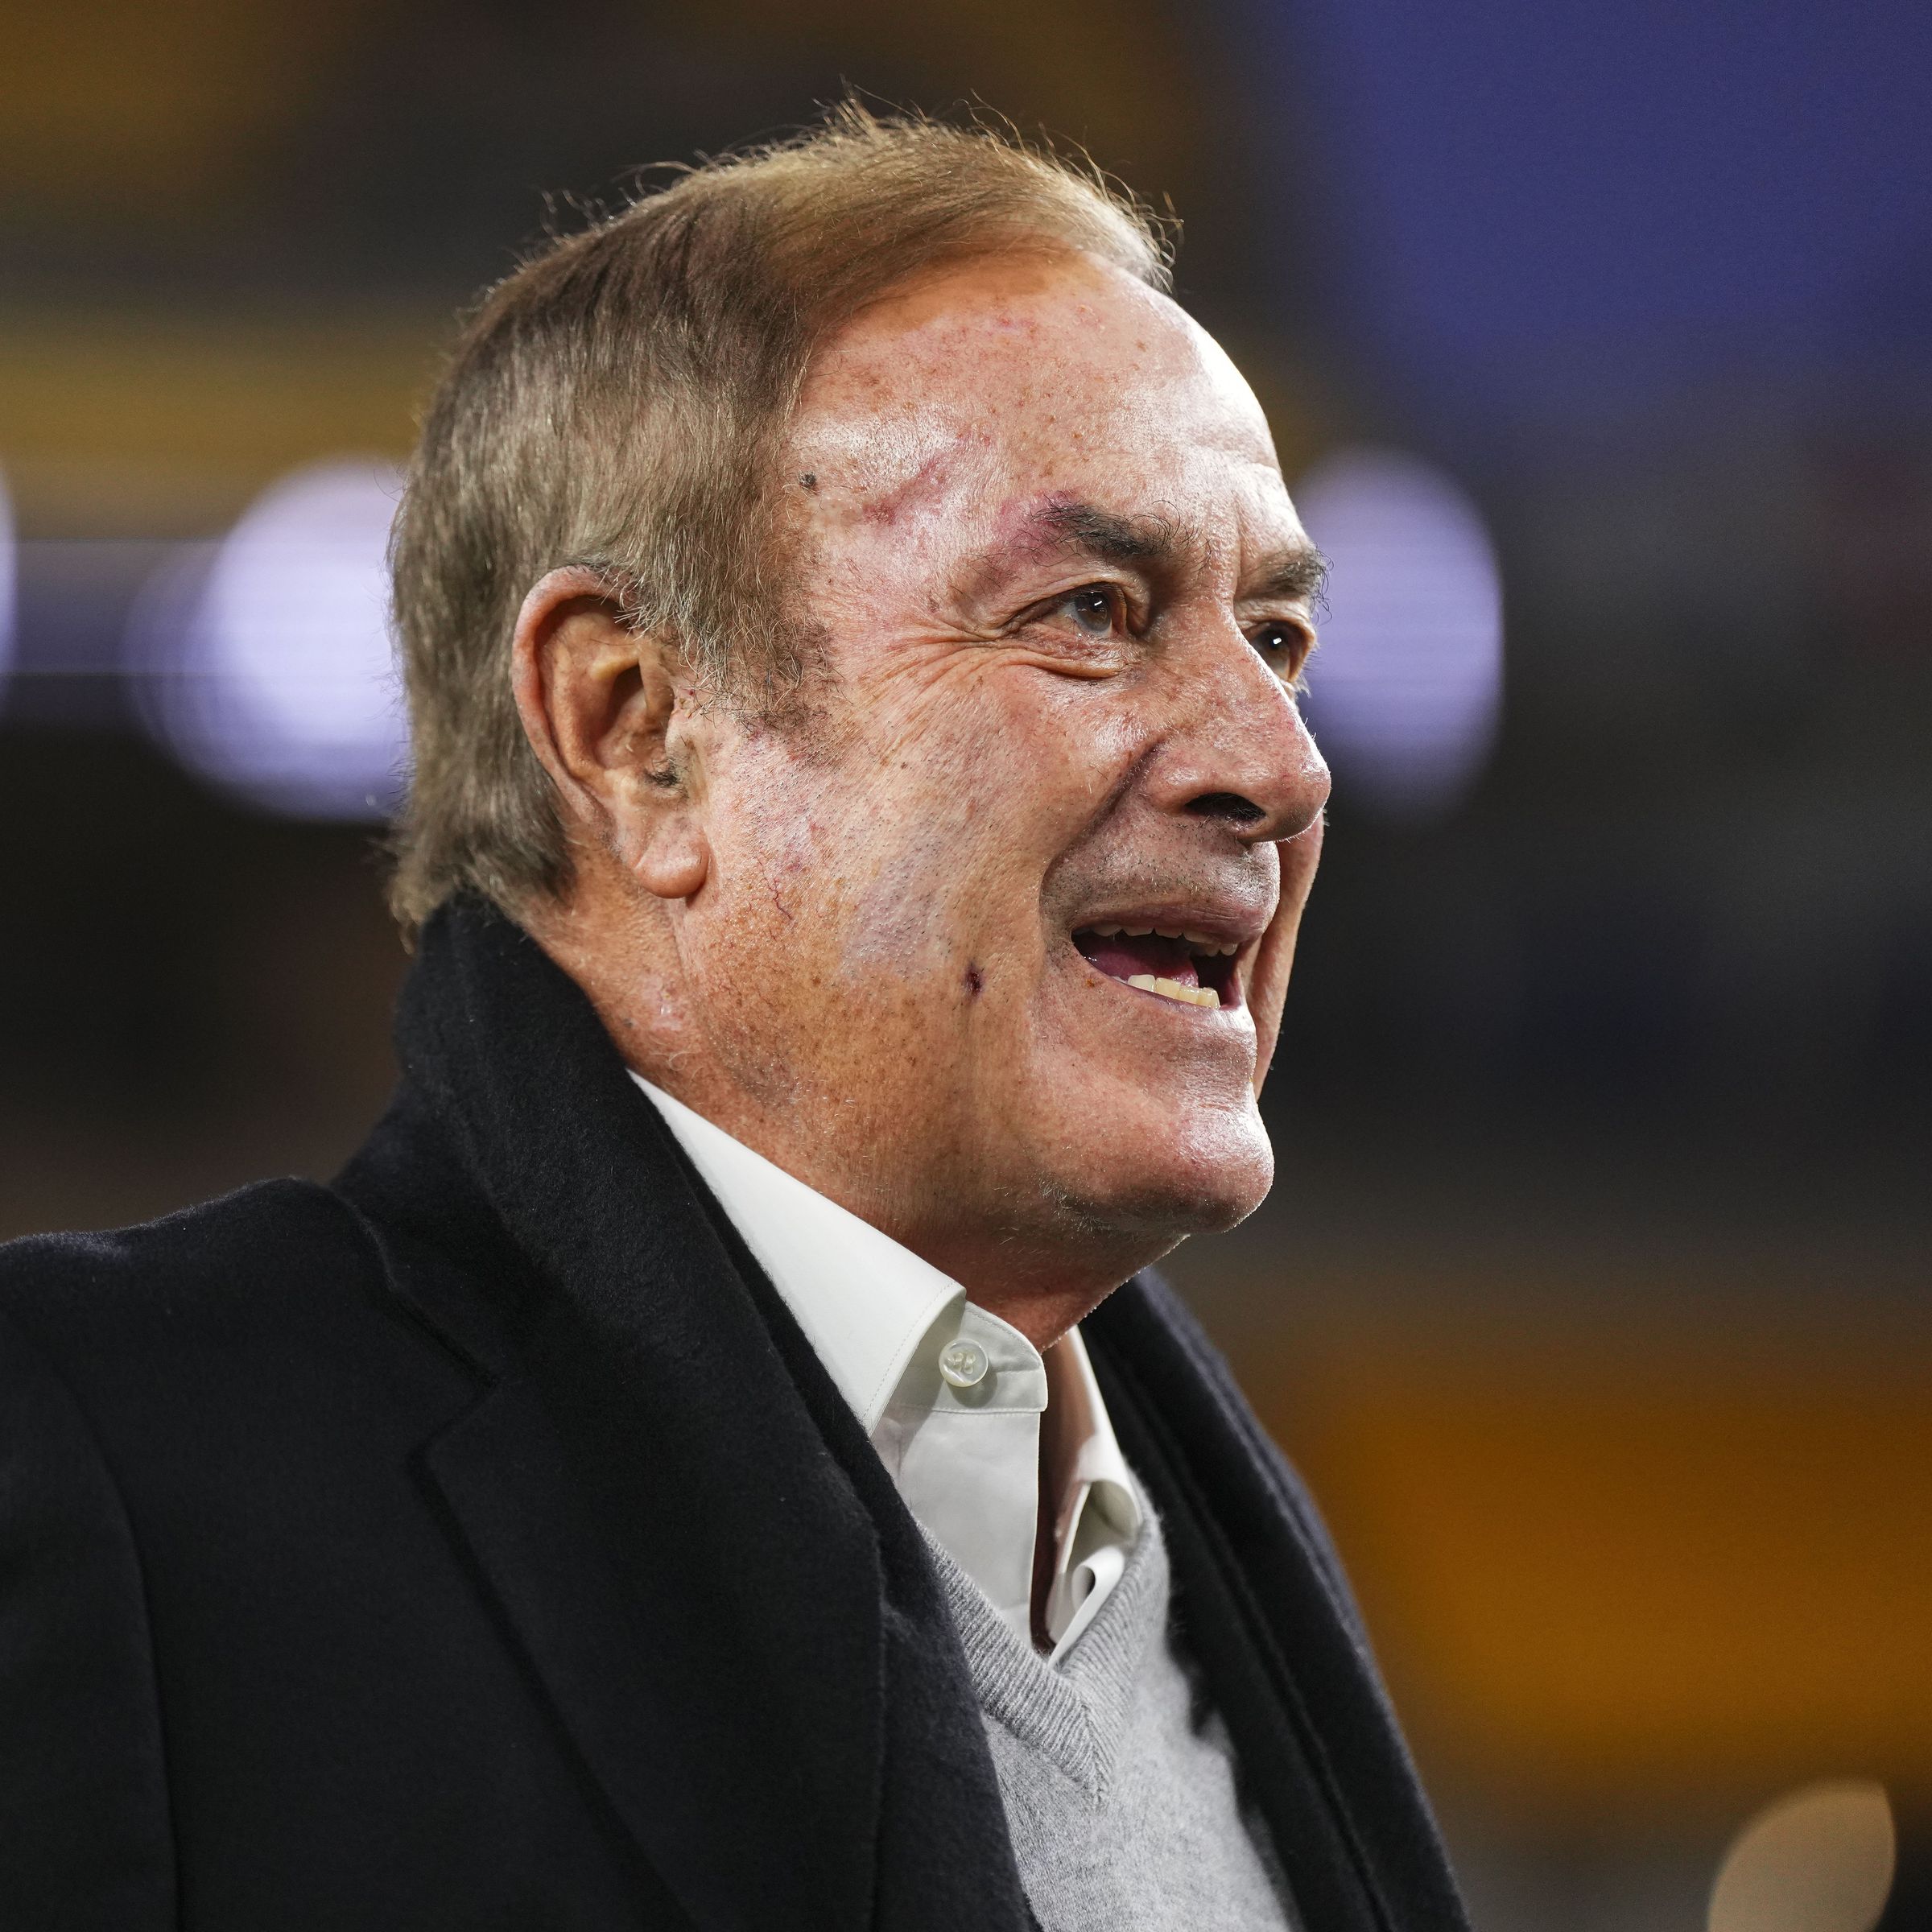 Al Michaels looks on from the sideline prior to an NFL football game between the Tennessee Titans and the Pittsburgh Steelers at Acrisure Stadium on November 2nd, 2023, in Pittsburgh, Pennsylvania.